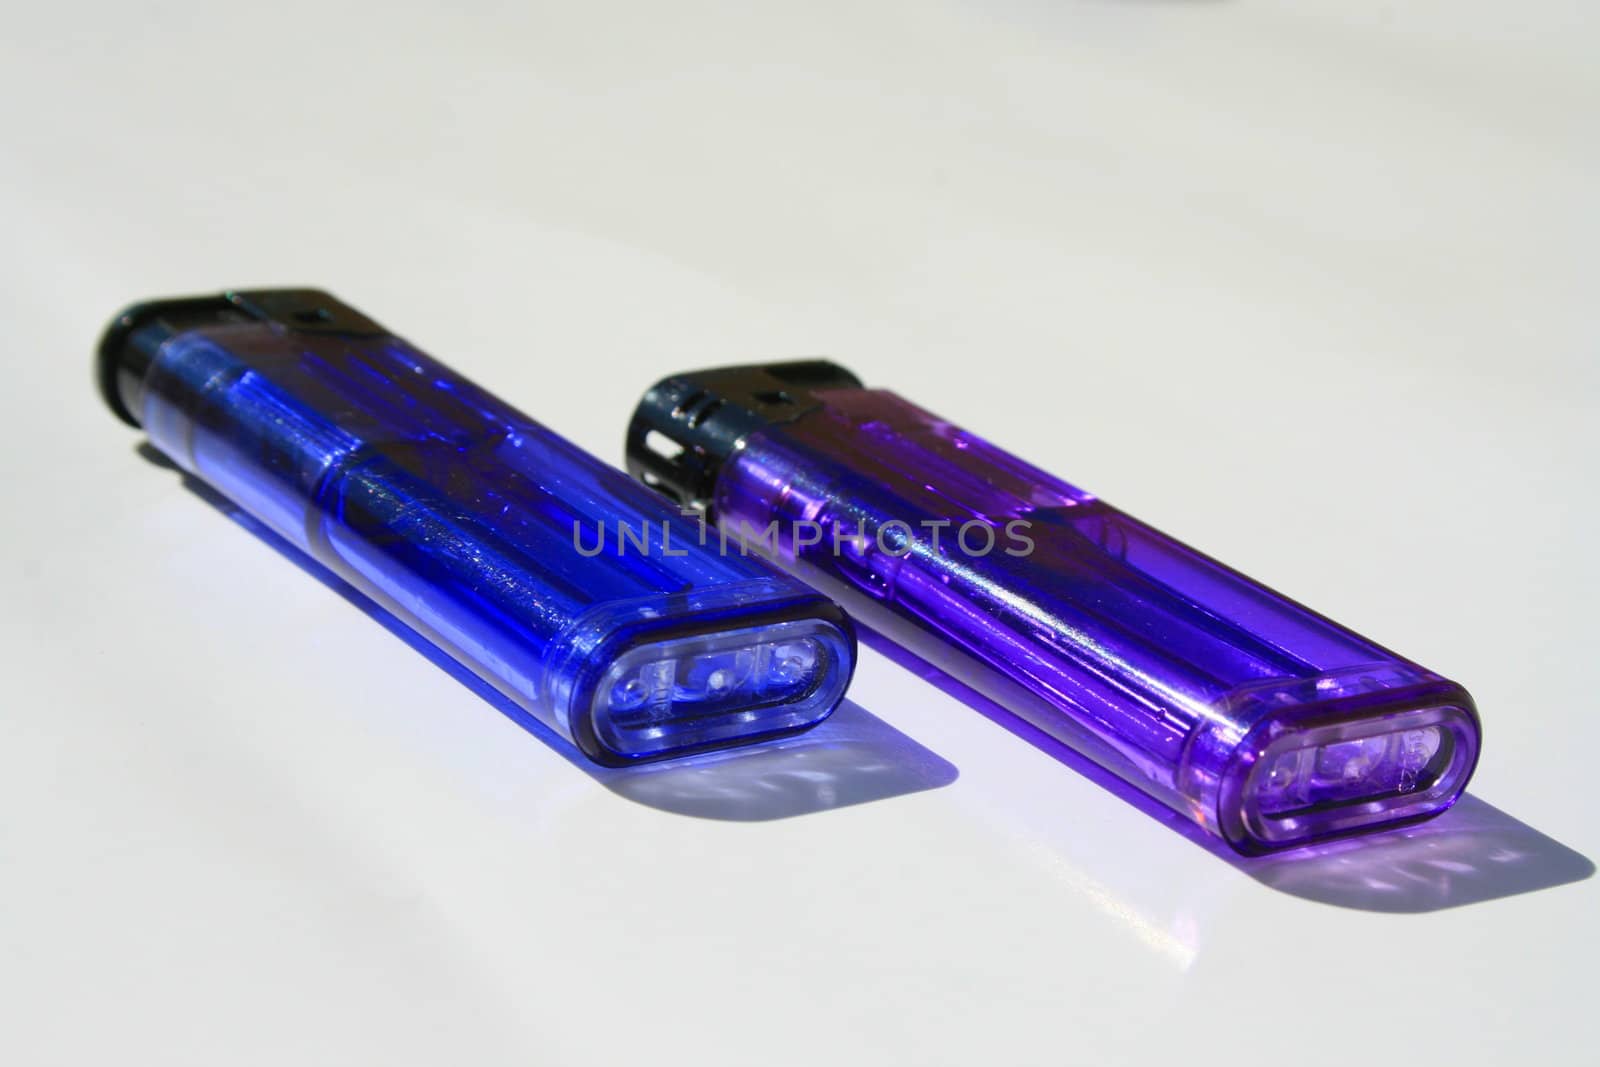 Close up of the two colorful lighters.
